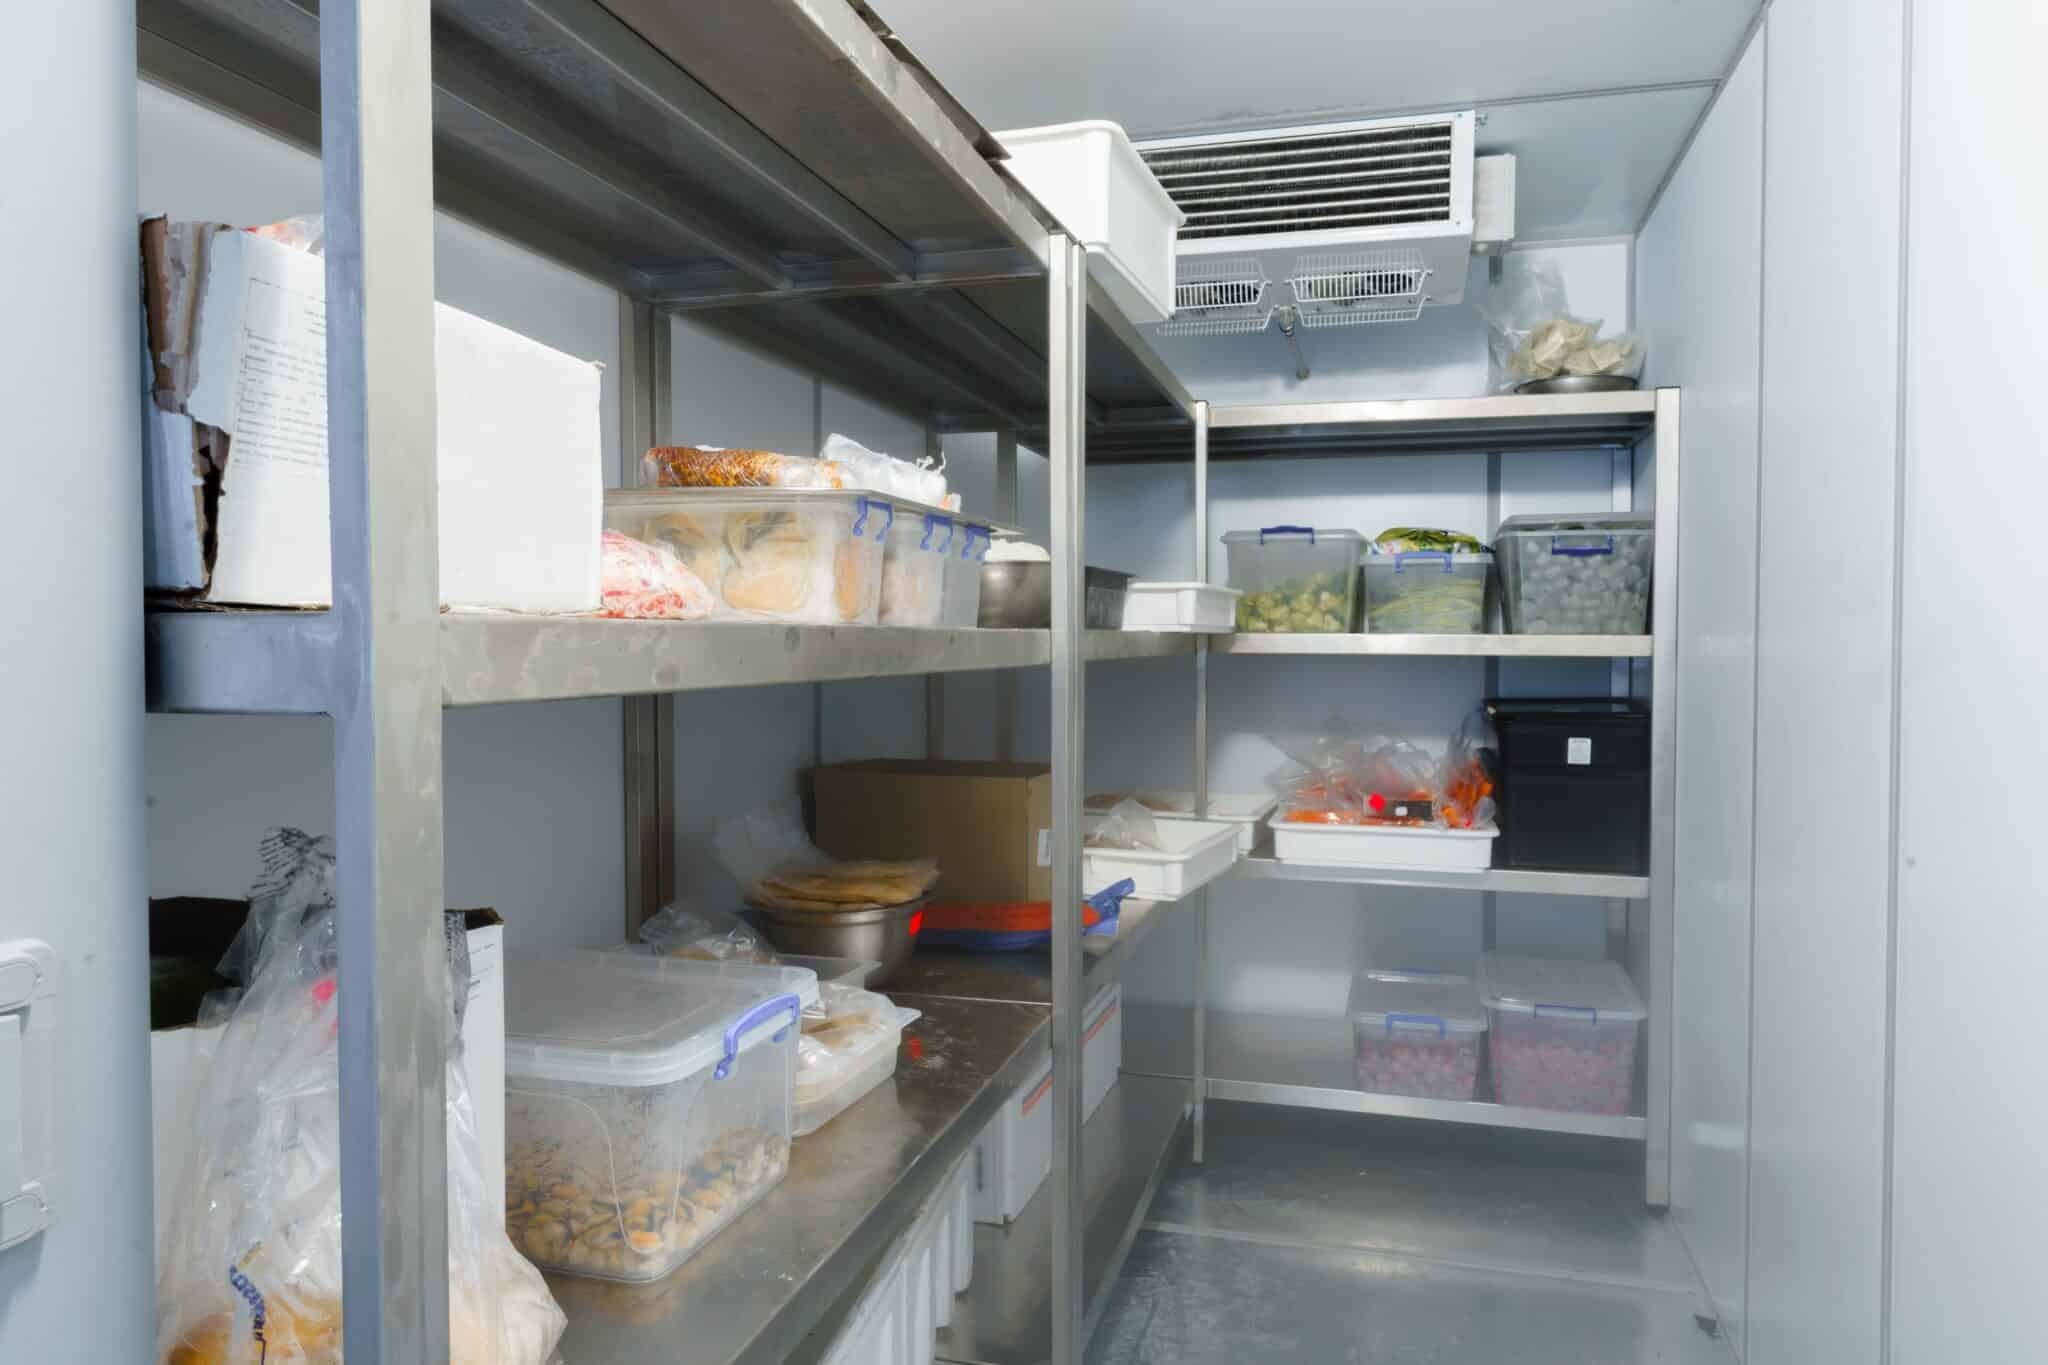 Optimising the operation of existing cold rooms